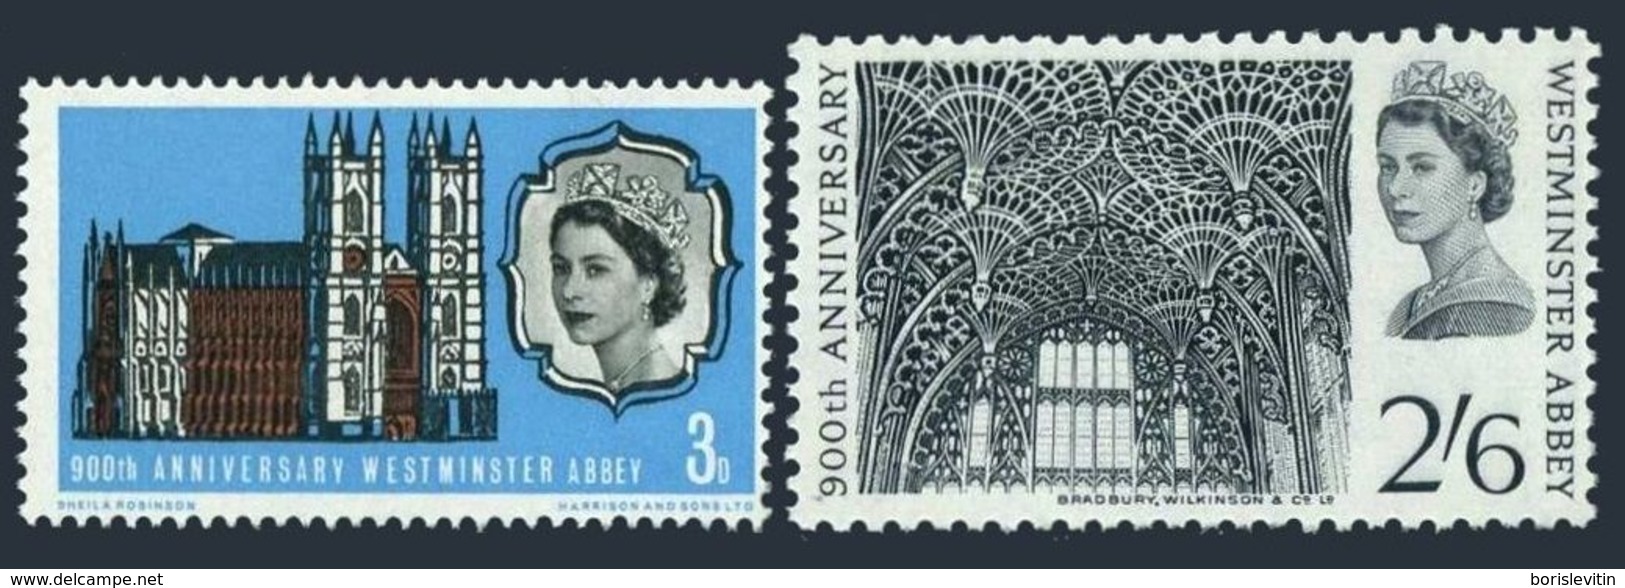 Great Britain  452-453,MNH.Mi 416-417.Westminster Abbey,900th Ann.1966.Fan Vauting,Chapel Of Henry VII. - Unused Stamps